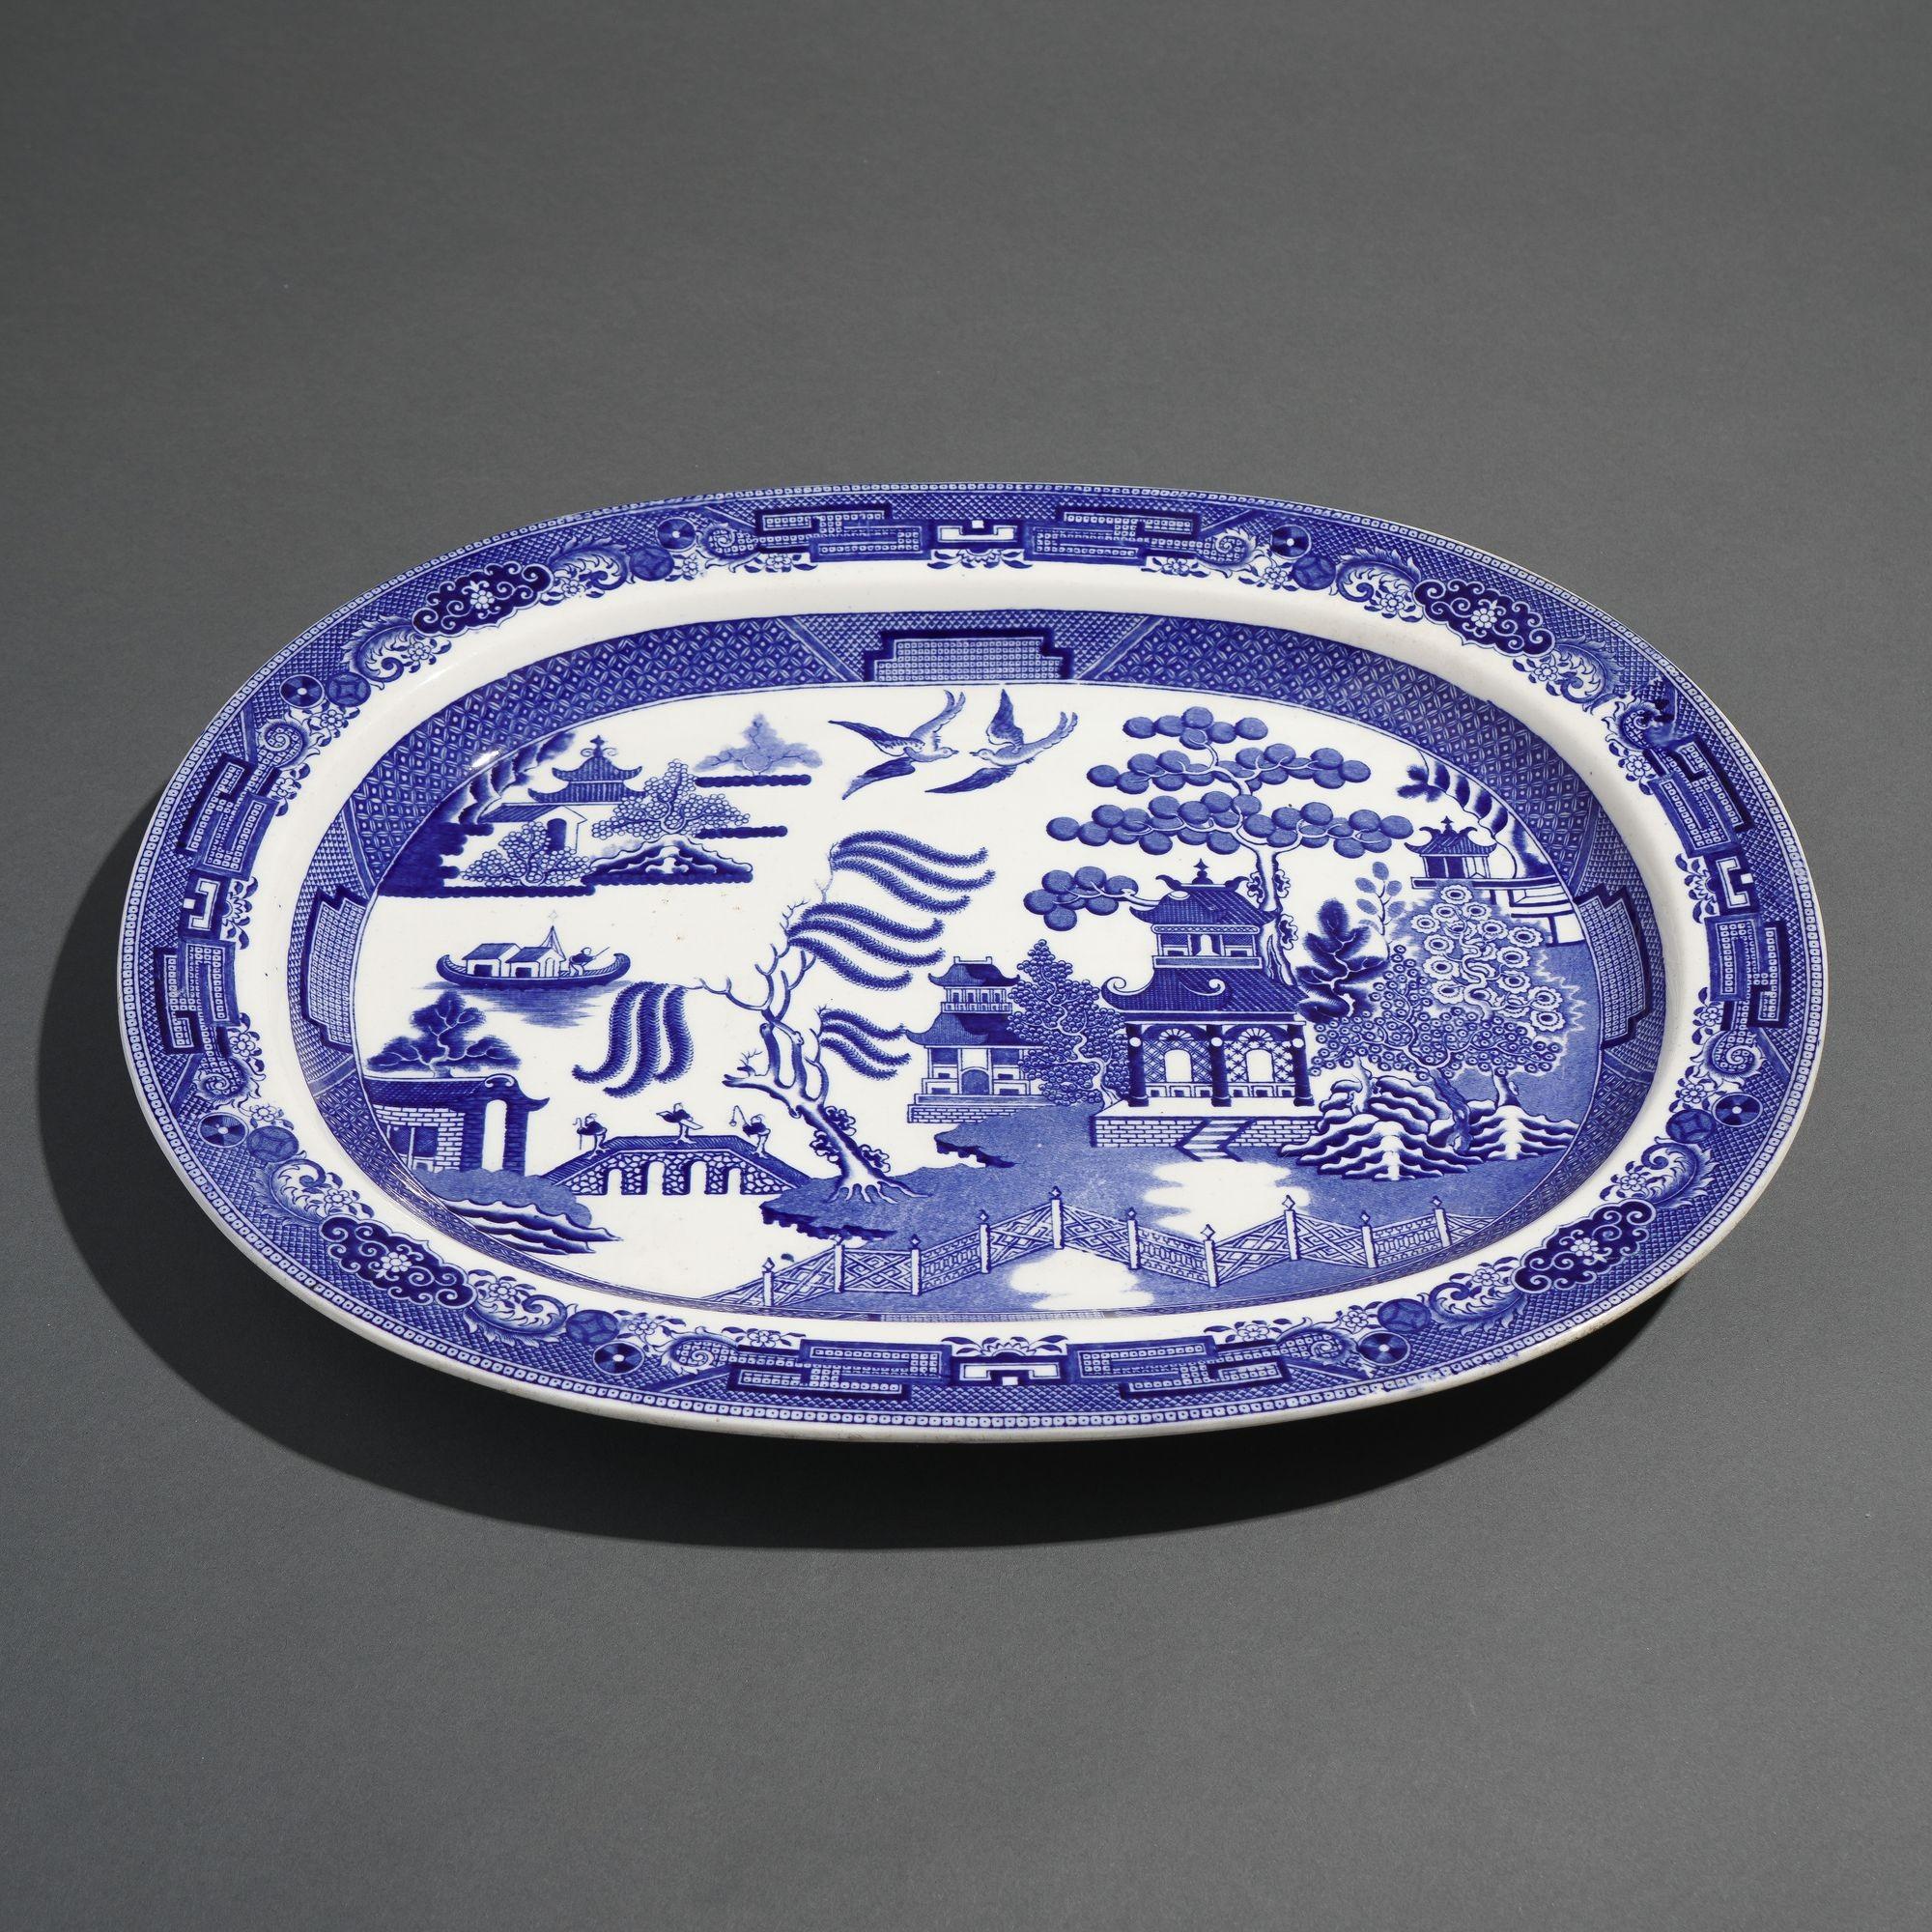 Staffordshire oval platter decorated in the Willow transfer pattern, after a Chinese model.

Stamped on the underside: Wedgwood, 3EO, T (which indicates the manufacturing years of 1891-92)
Marked in the glaze on the underside: